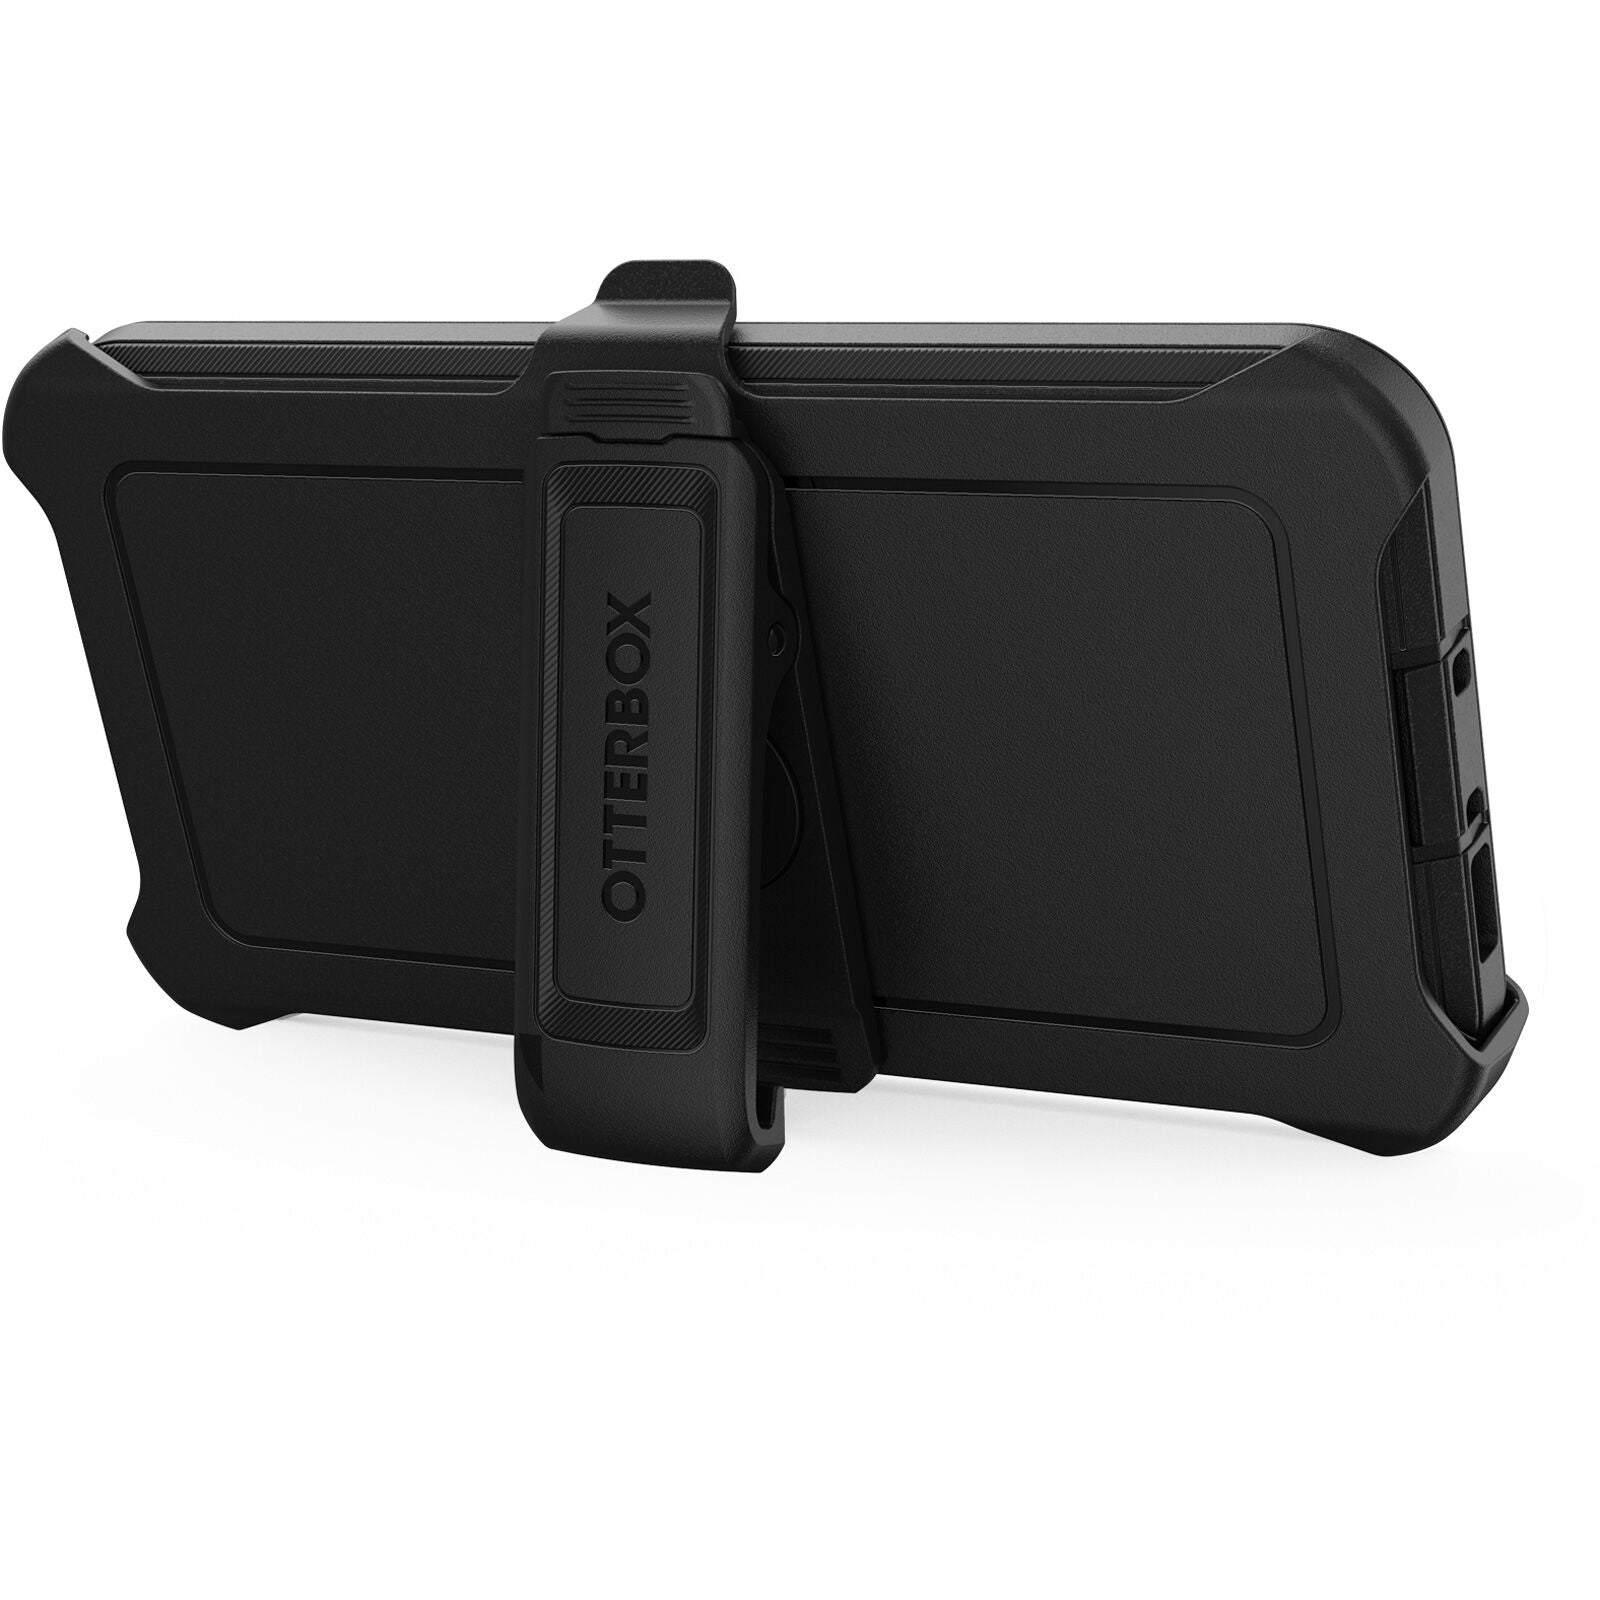 Otterbox Defender Case for Samsung Galaxy S23 Plus